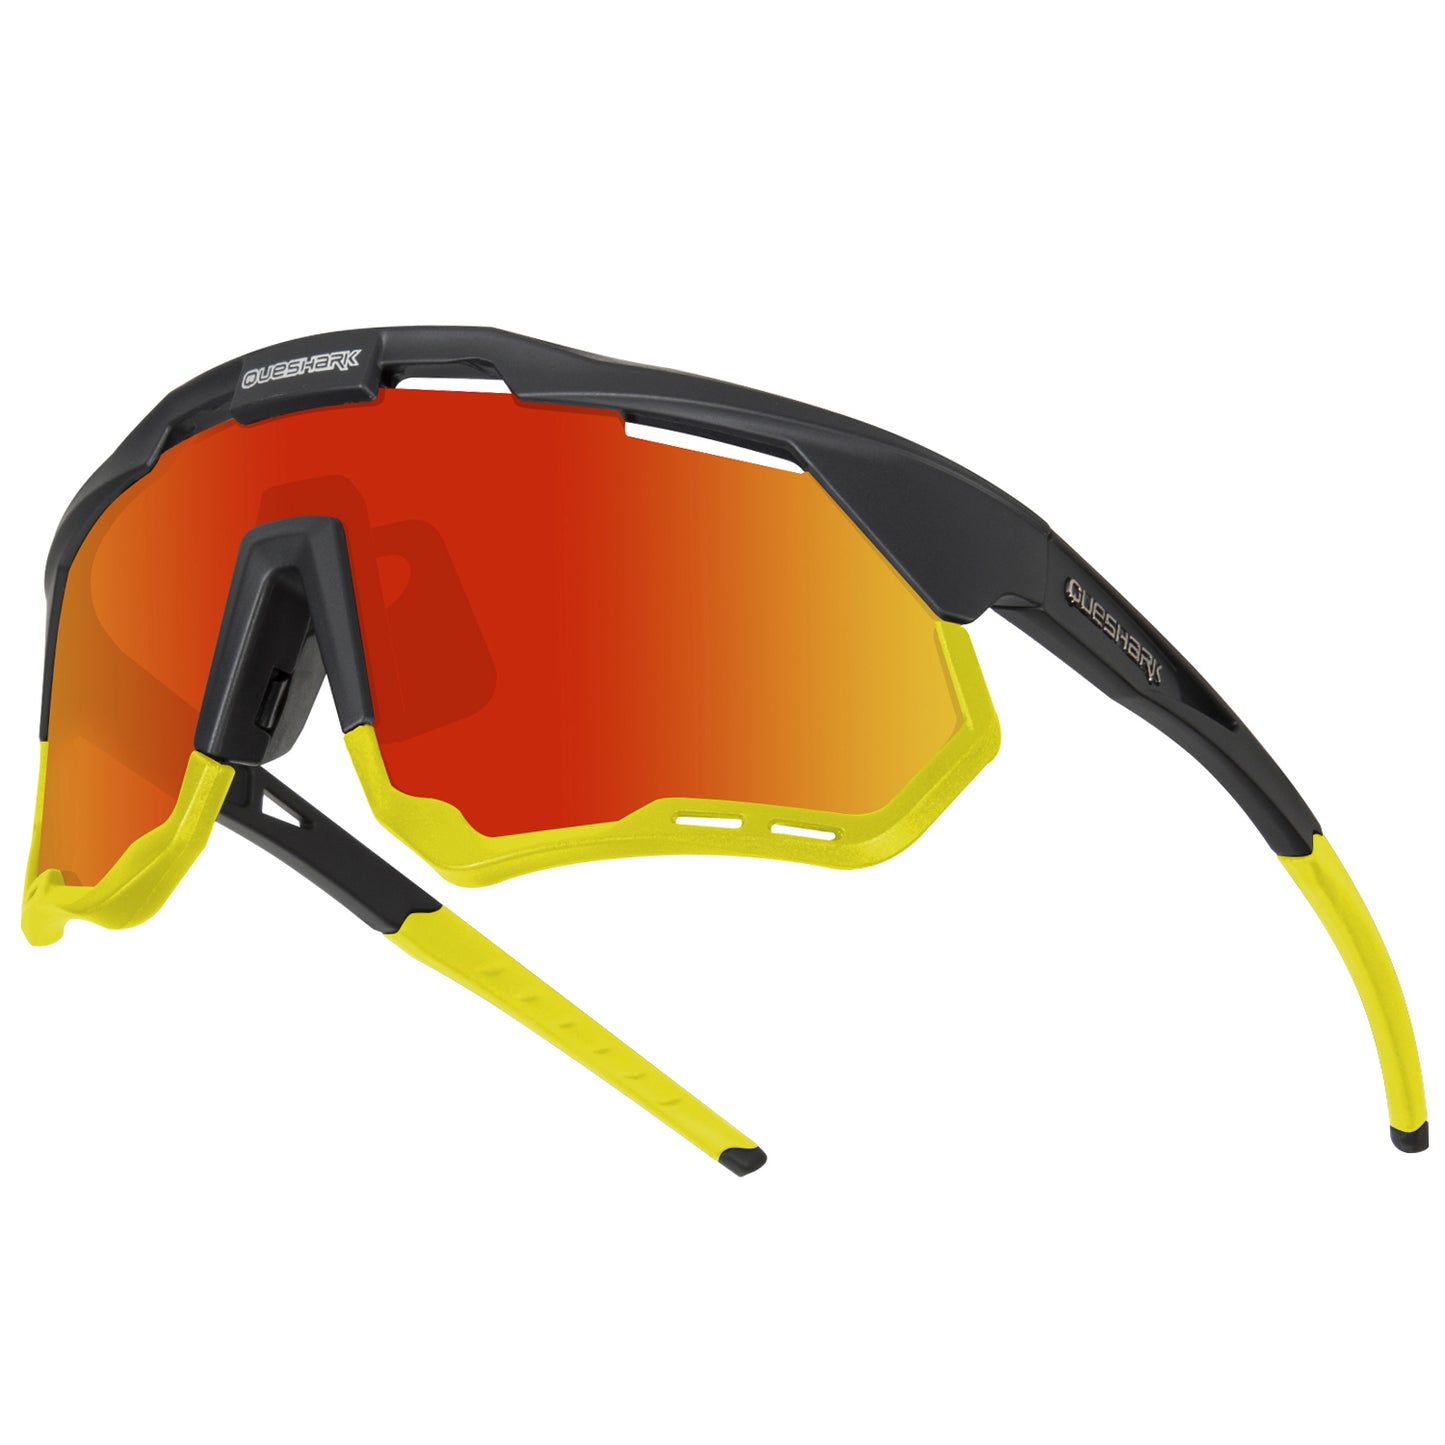 QE52 Black Yellow Polarized Cycling Glasses Men Women Sport Sunglasses with Replaceable Frame/Lens